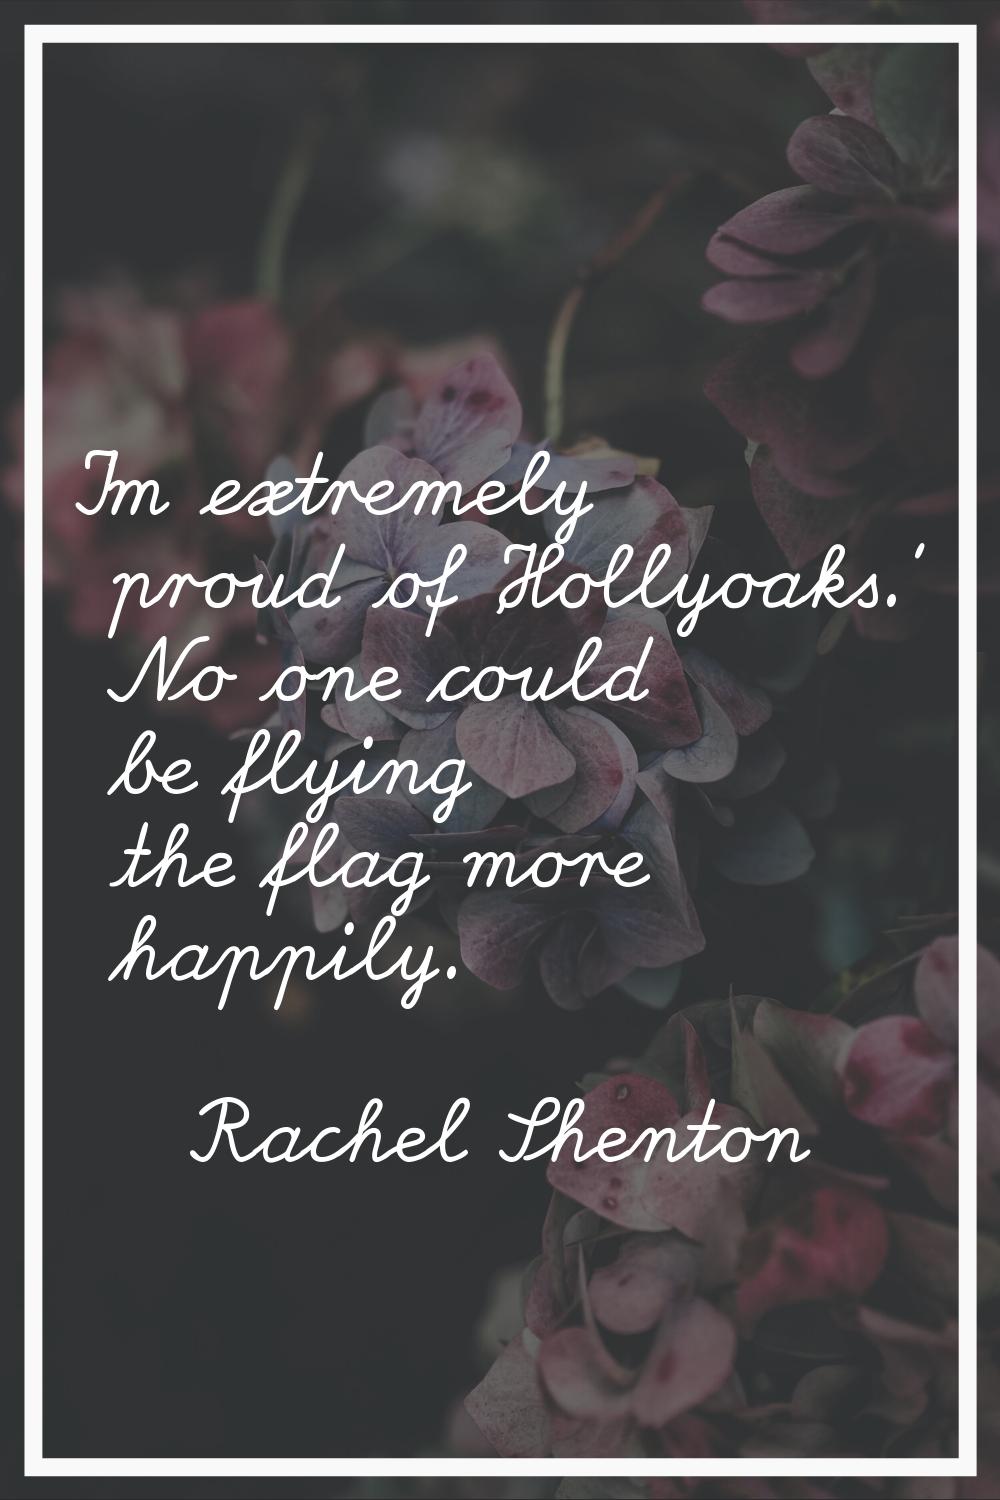 I'm extremely proud of 'Hollyoaks.' No one could be flying the flag more happily.